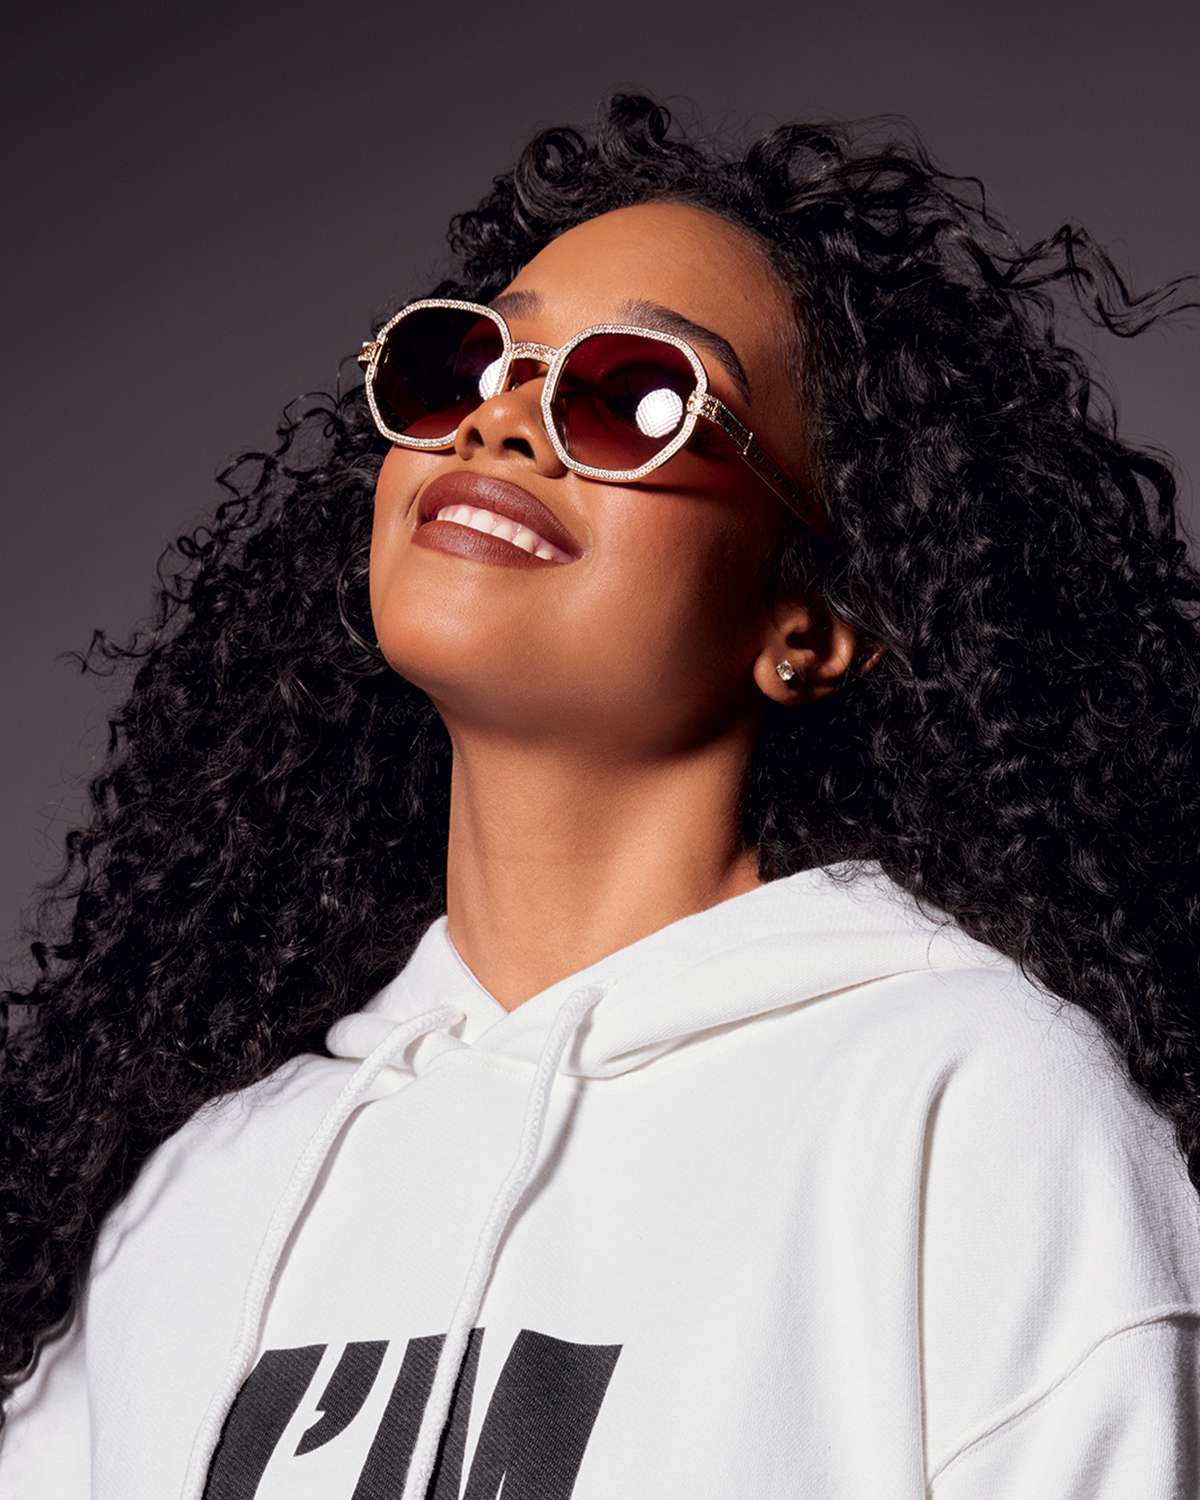 H.E.R Is the New Face of L'Oreal